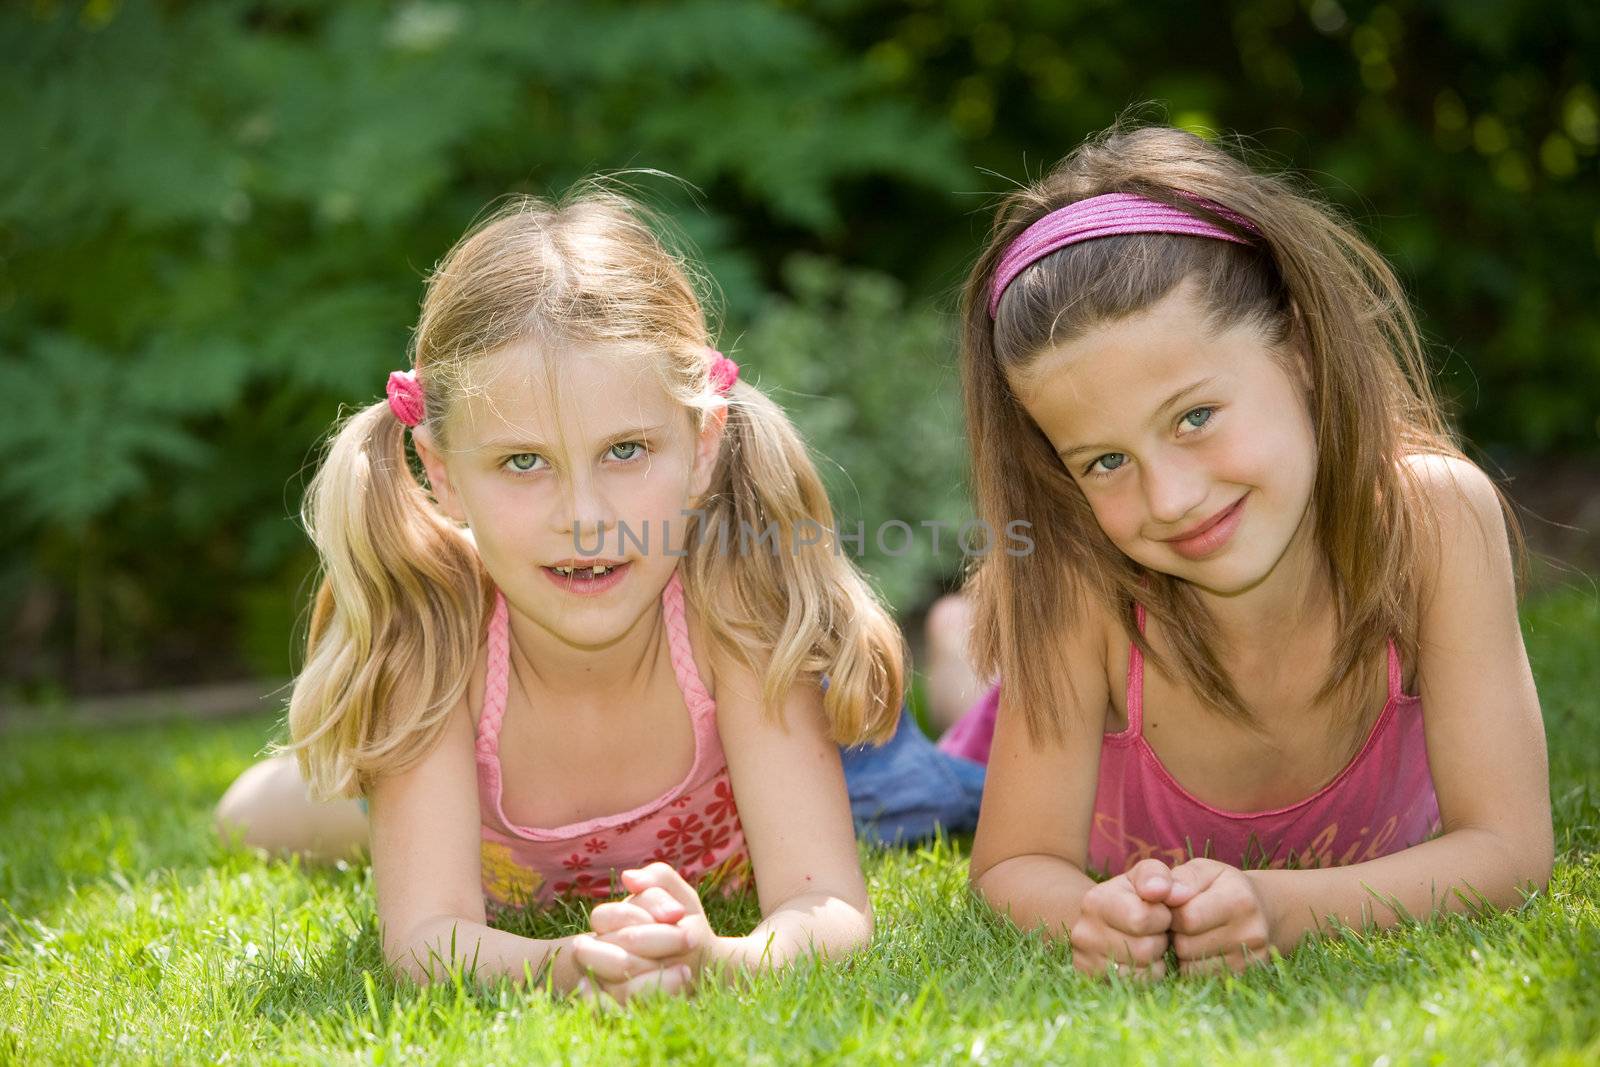 Two cute young girls lying in the grass together on a summer day